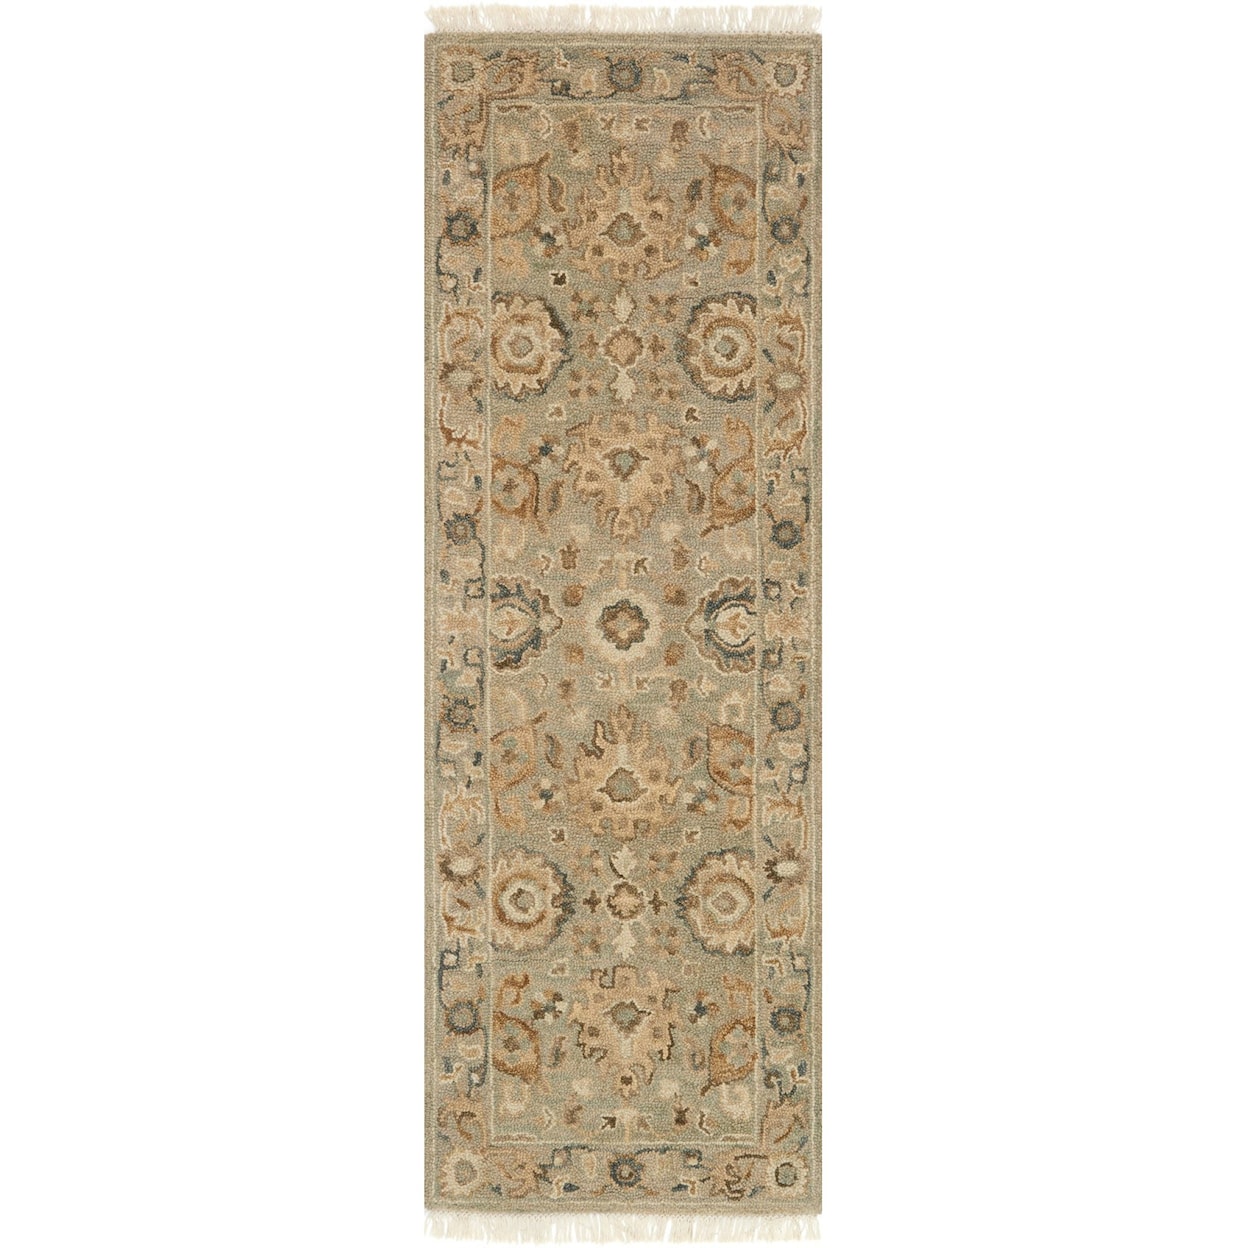 Magnolia Home by Joanna Gaines for Loloi Hanover 2' 6" X 7' 6" Runner Rug